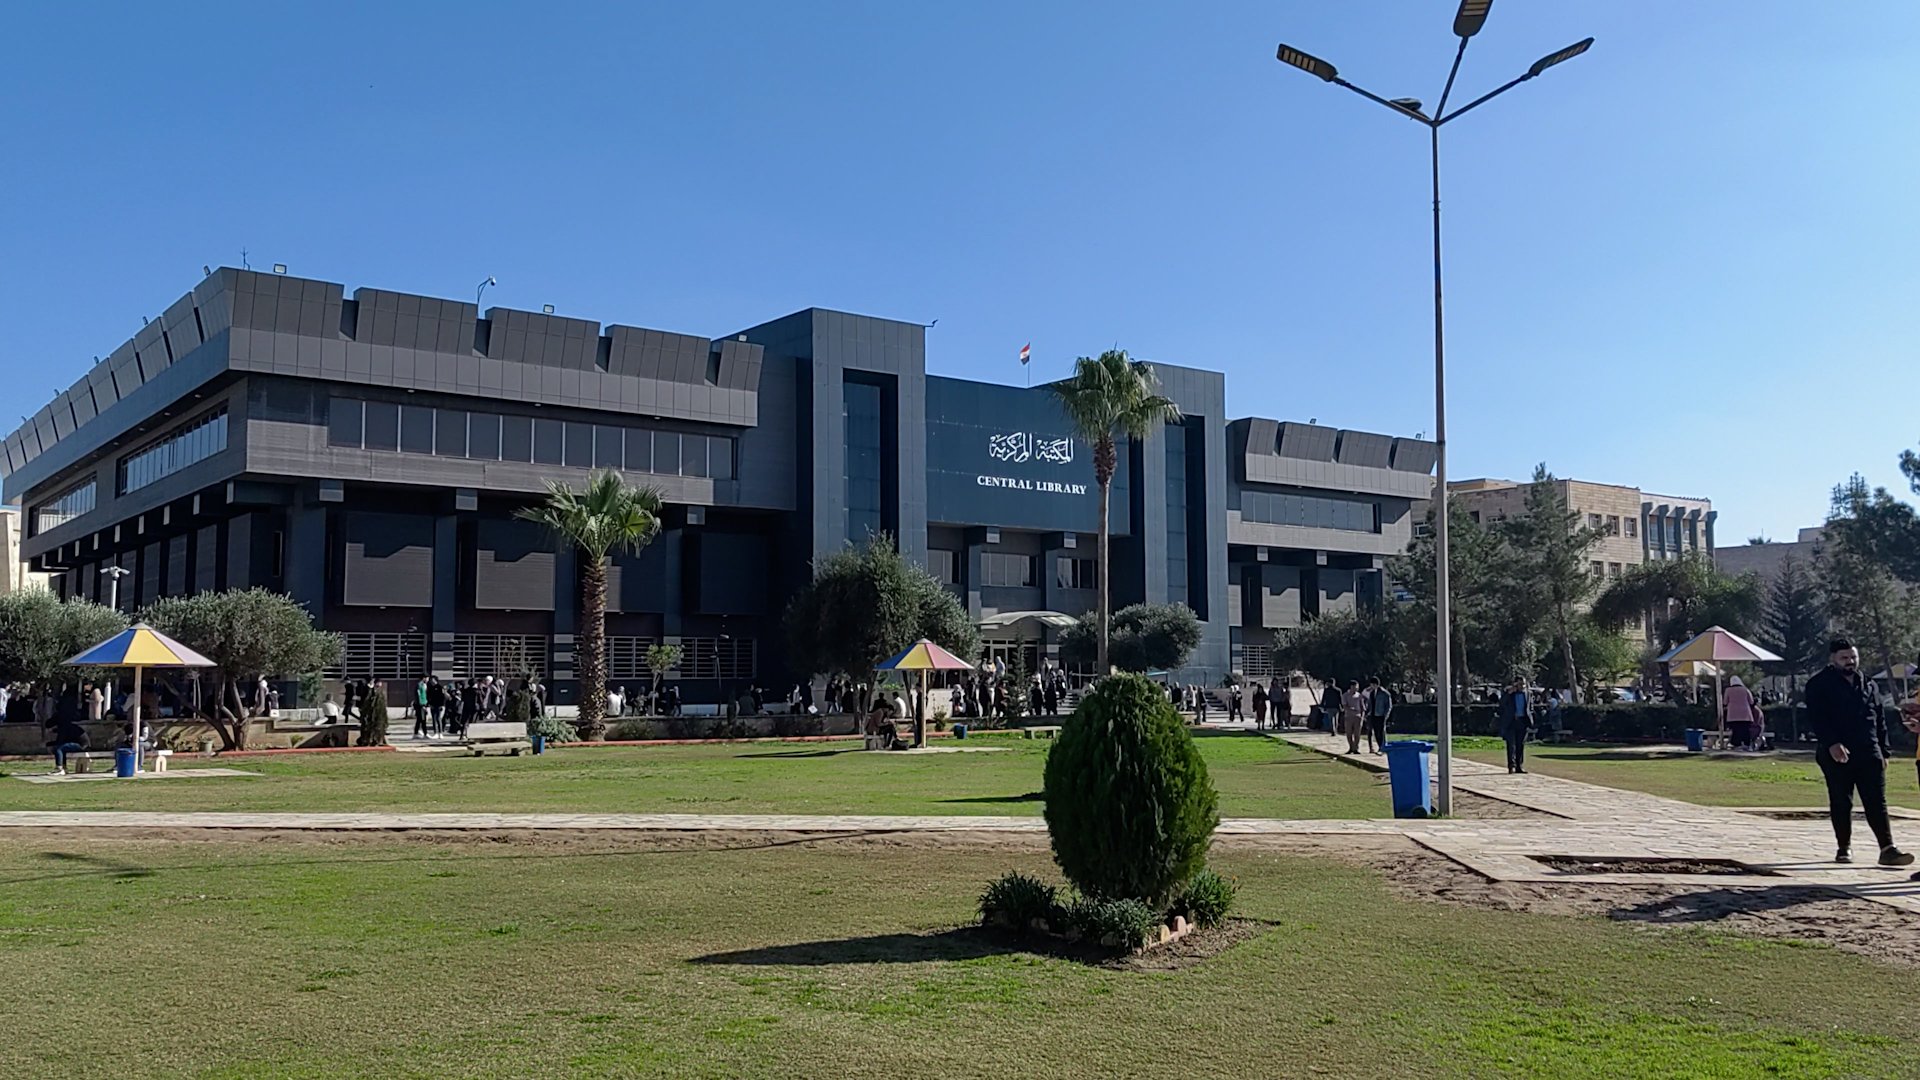 Reconstruction works near completion at Mosul University